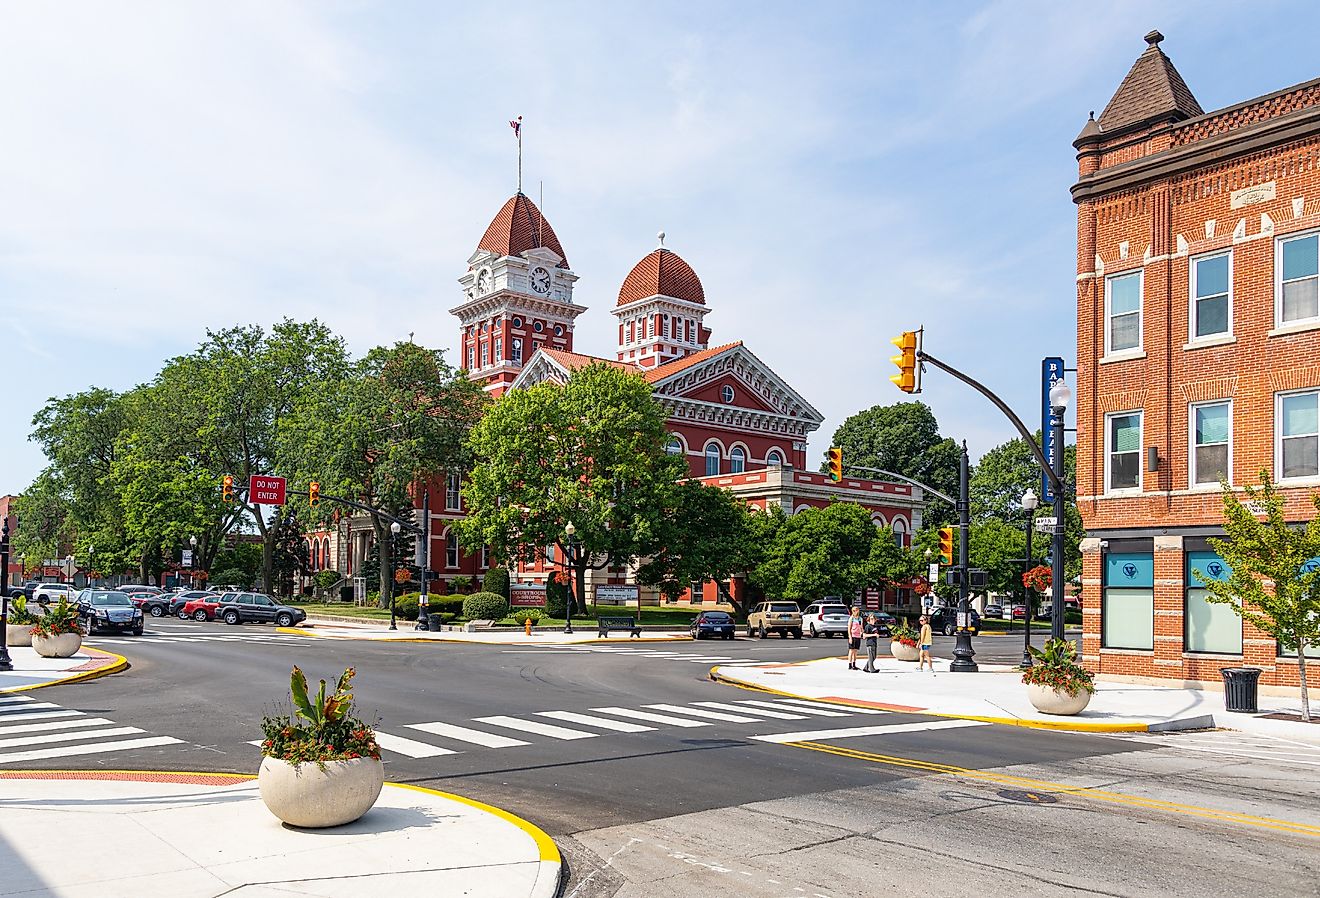 The Crown Point Courthouse Square Historic District, Indiana. Image credit Roberto Galan via Shutterstock